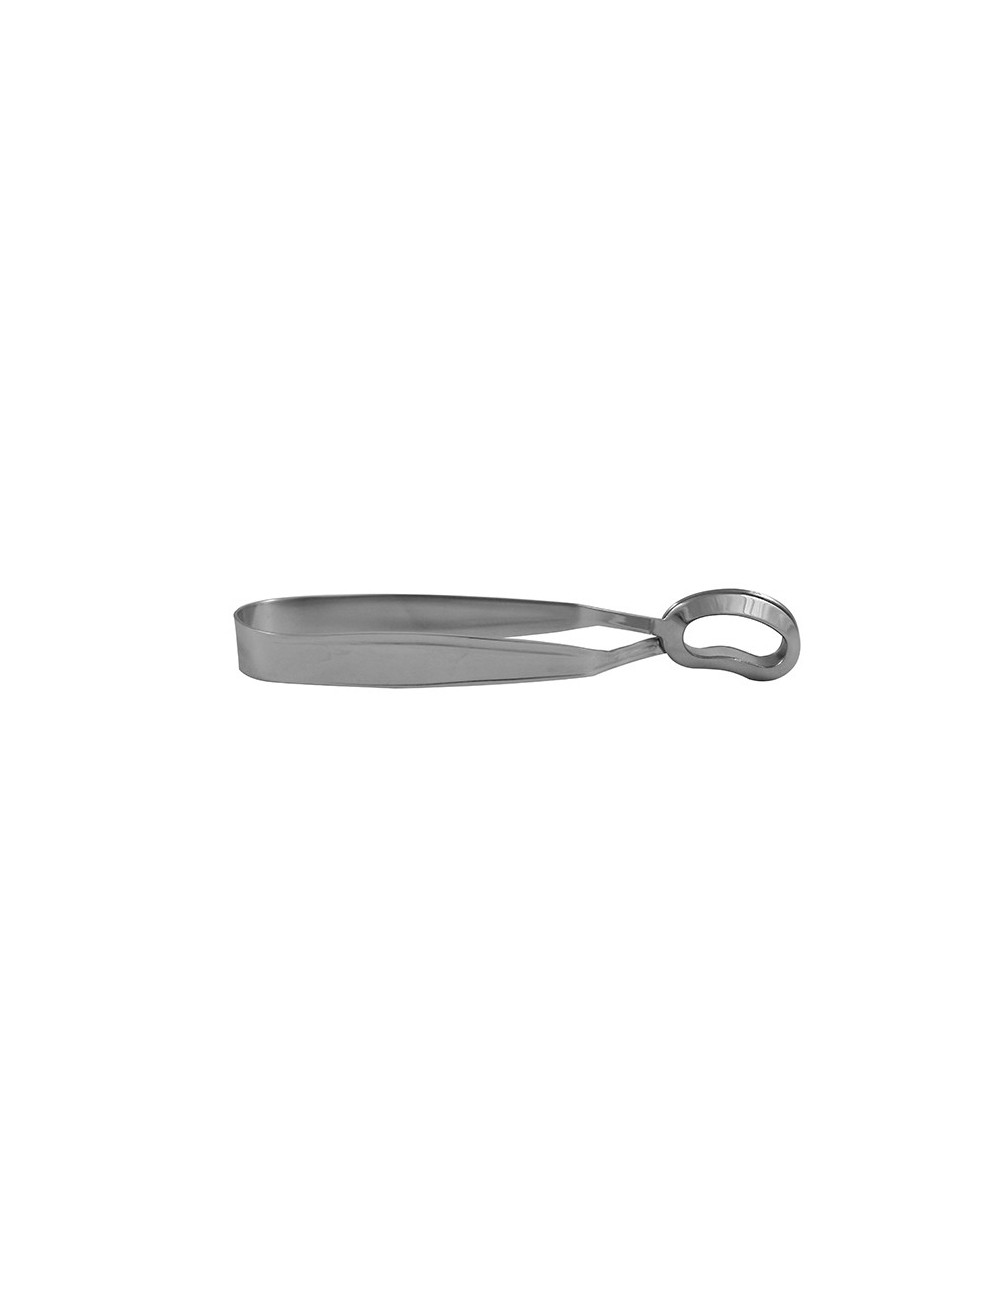 SNAIL TONGS - STAINLESS STEEL